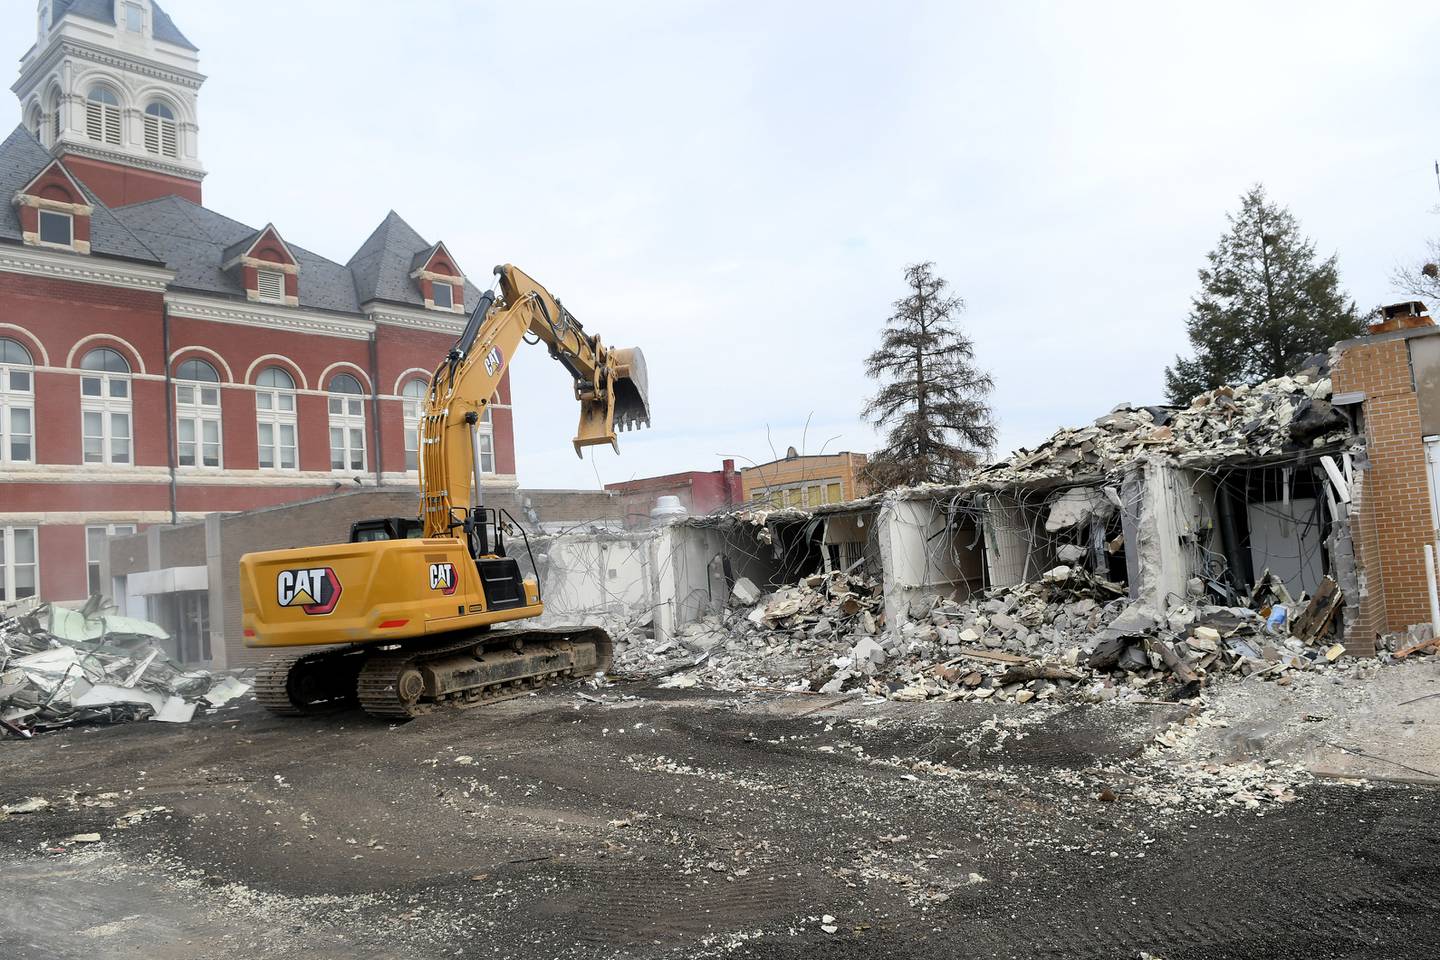 Demolition of the old Ogle County Jail in downtown Oregon started Monday morning. The former jail, located south of the historic Ogle County Courthouse, was constructed in the late 1960s and replaced by the Ogle County Correctional Center in 2020.